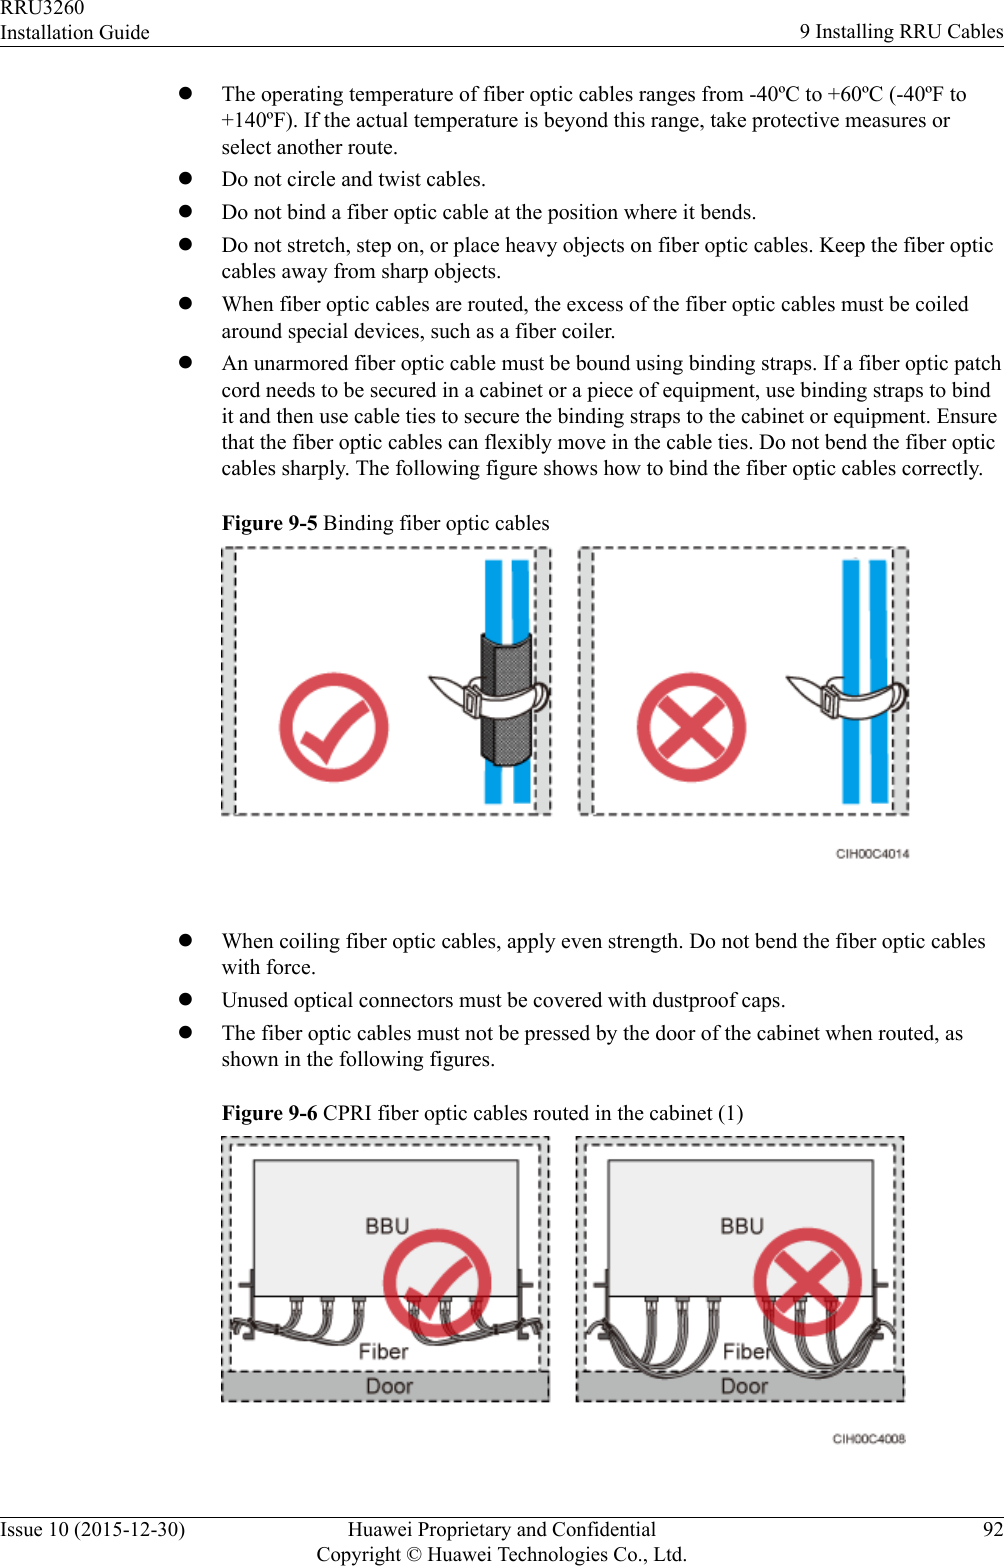 lThe operating temperature of fiber optic cables ranges from -40ºC to +60ºC (-40ºF to+140ºF). If the actual temperature is beyond this range, take protective measures orselect another route.lDo not circle and twist cables.lDo not bind a fiber optic cable at the position where it bends.lDo not stretch, step on, or place heavy objects on fiber optic cables. Keep the fiber opticcables away from sharp objects.lWhen fiber optic cables are routed, the excess of the fiber optic cables must be coiledaround special devices, such as a fiber coiler.lAn unarmored fiber optic cable must be bound using binding straps. If a fiber optic patchcord needs to be secured in a cabinet or a piece of equipment, use binding straps to bindit and then use cable ties to secure the binding straps to the cabinet or equipment. Ensurethat the fiber optic cables can flexibly move in the cable ties. Do not bend the fiber opticcables sharply. The following figure shows how to bind the fiber optic cables correctly.Figure 9-5 Binding fiber optic cables lWhen coiling fiber optic cables, apply even strength. Do not bend the fiber optic cableswith force.lUnused optical connectors must be covered with dustproof caps.lThe fiber optic cables must not be pressed by the door of the cabinet when routed, asshown in the following figures.Figure 9-6 CPRI fiber optic cables routed in the cabinet (1)RRU3260Installation Guide 9 Installing RRU CablesIssue 10 (2015-12-30) Huawei Proprietary and ConfidentialCopyright © Huawei Technologies Co., Ltd.92